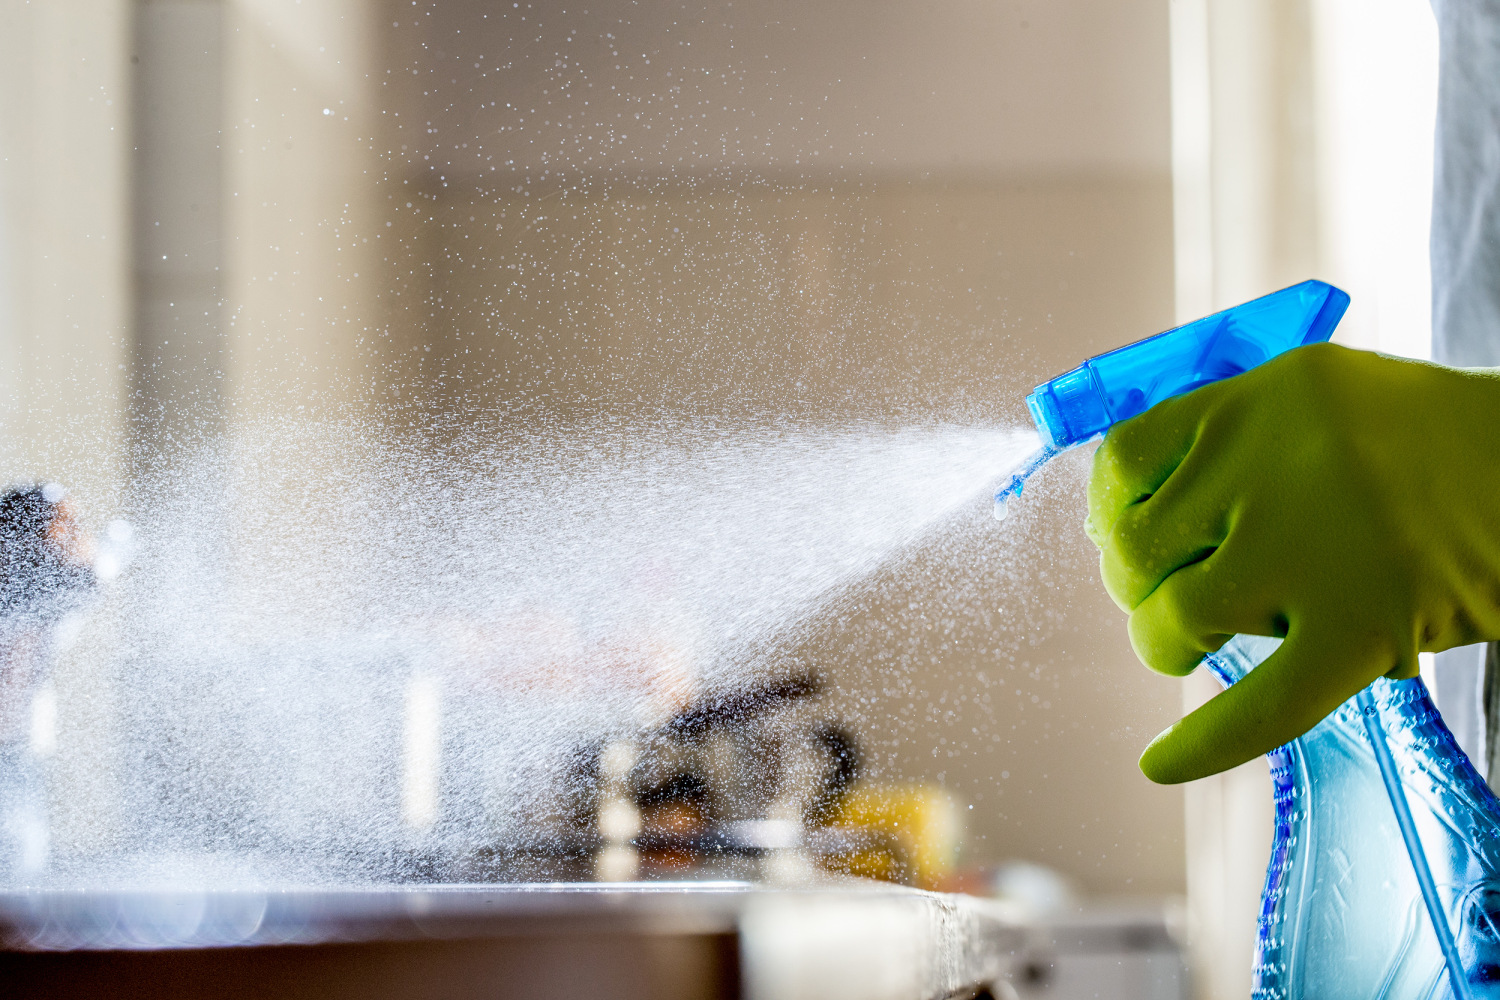 The 3 Best Surface Cleaners and Disinfectants of 2024